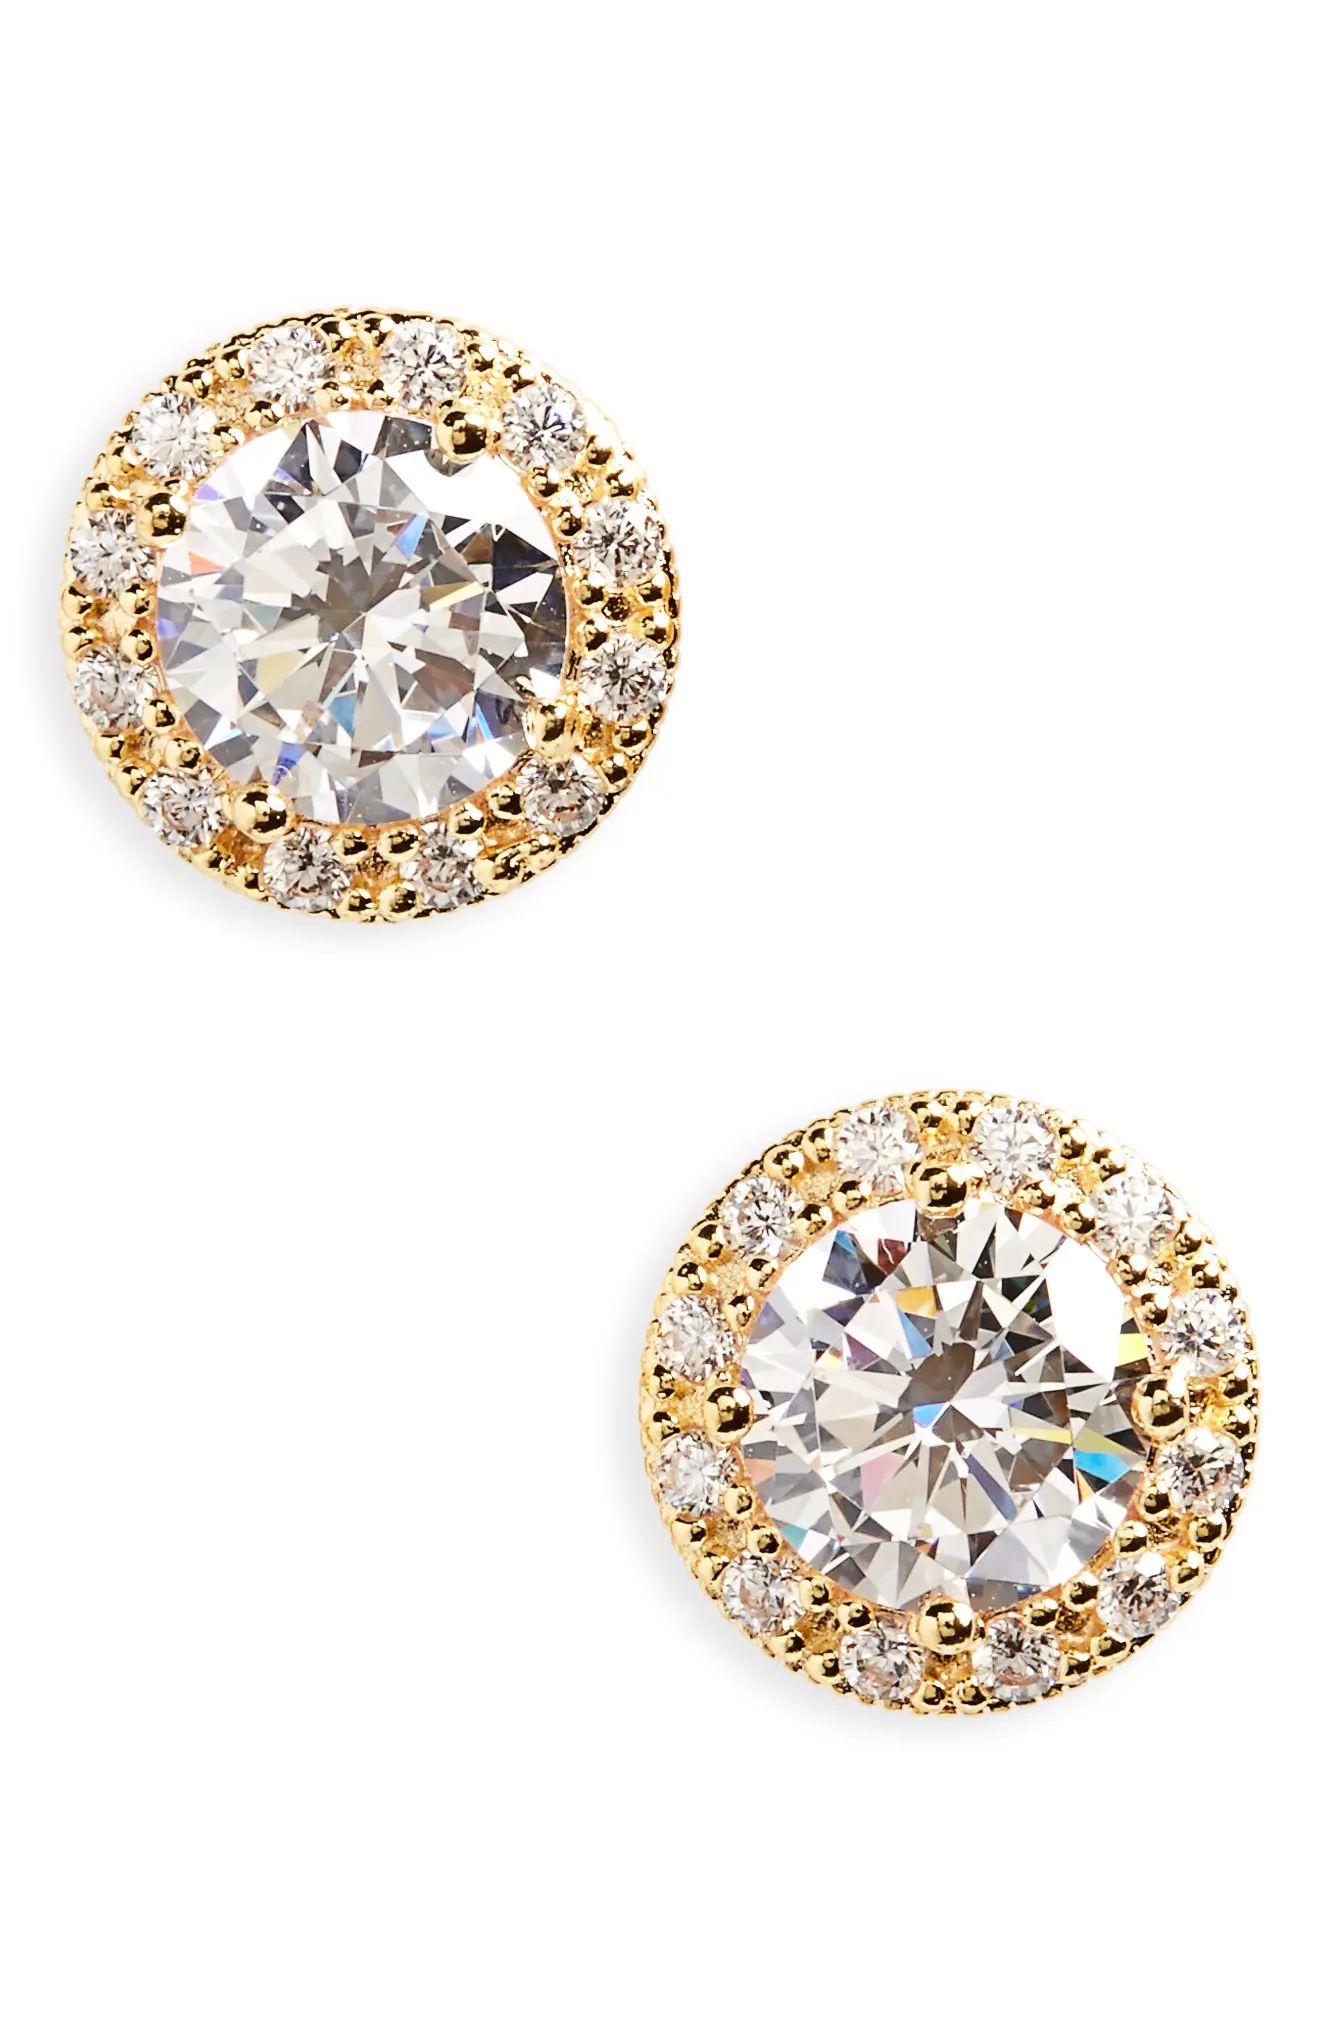 Nordstrom Pave Cubic Zirconia Stud Earrings in Gold at Nordstrom | Nordstrom